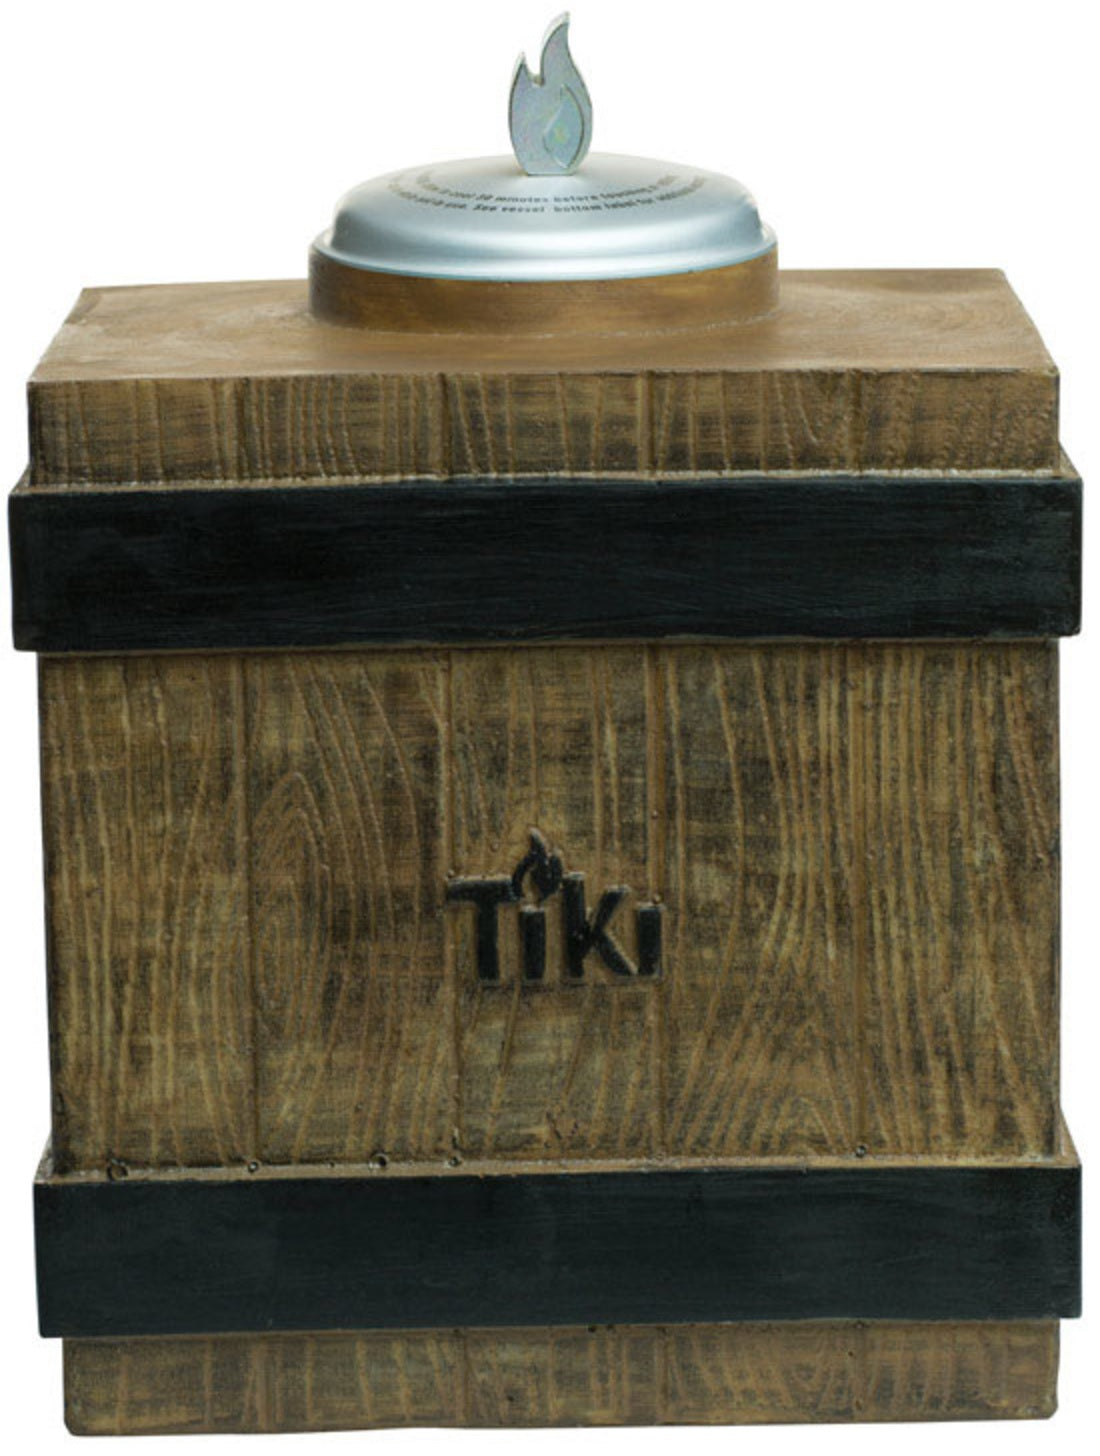 Tiki 1117035 Clean Burn Fire Crate Resin Table Torch, Brown